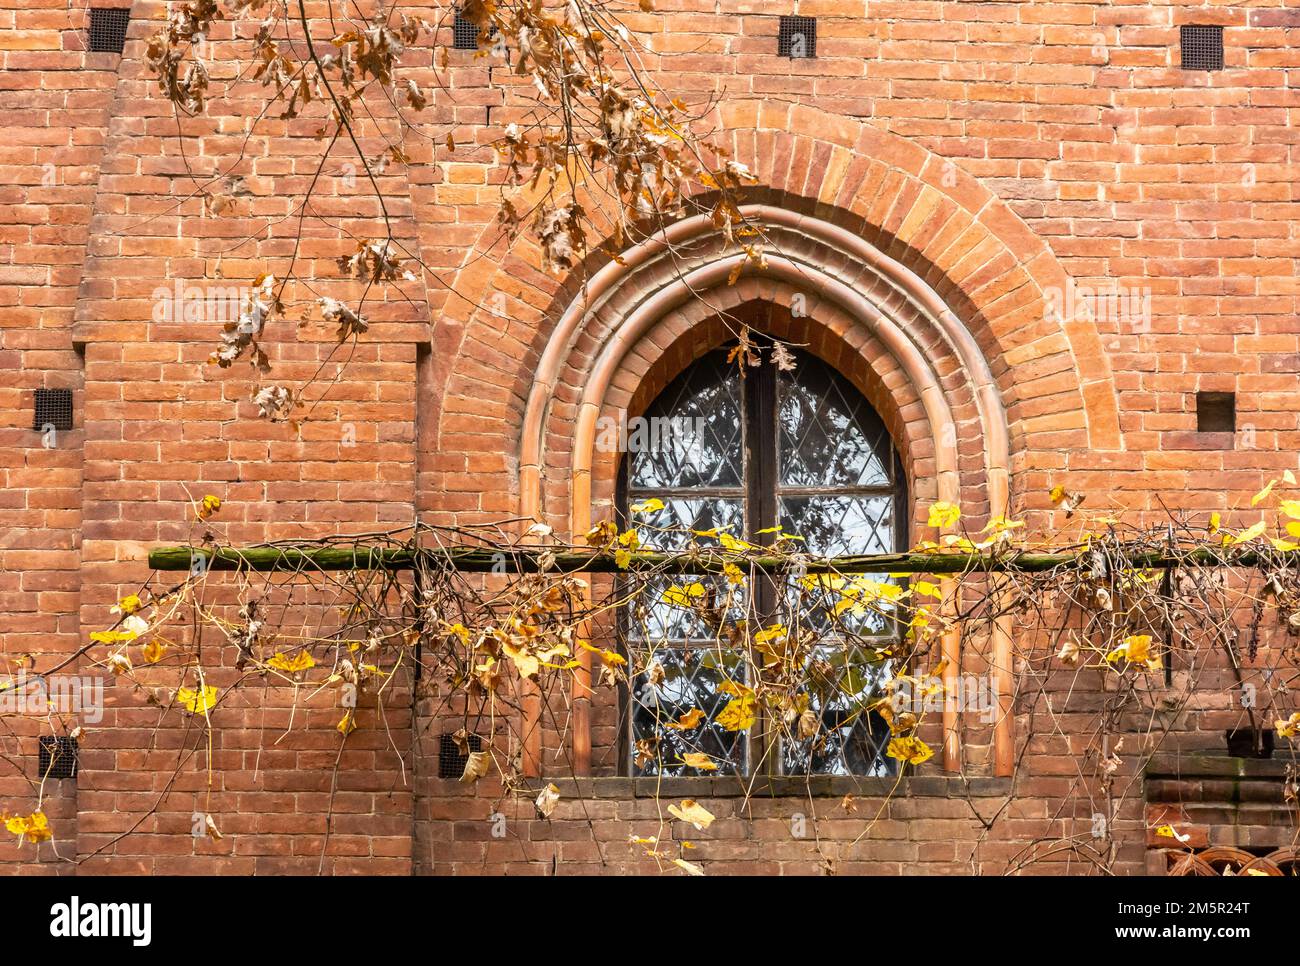 Detail of the window of the Medieval Village at the Valentino Park, Turin, Piedmont region of  northern Italy - Europe Stock Photo